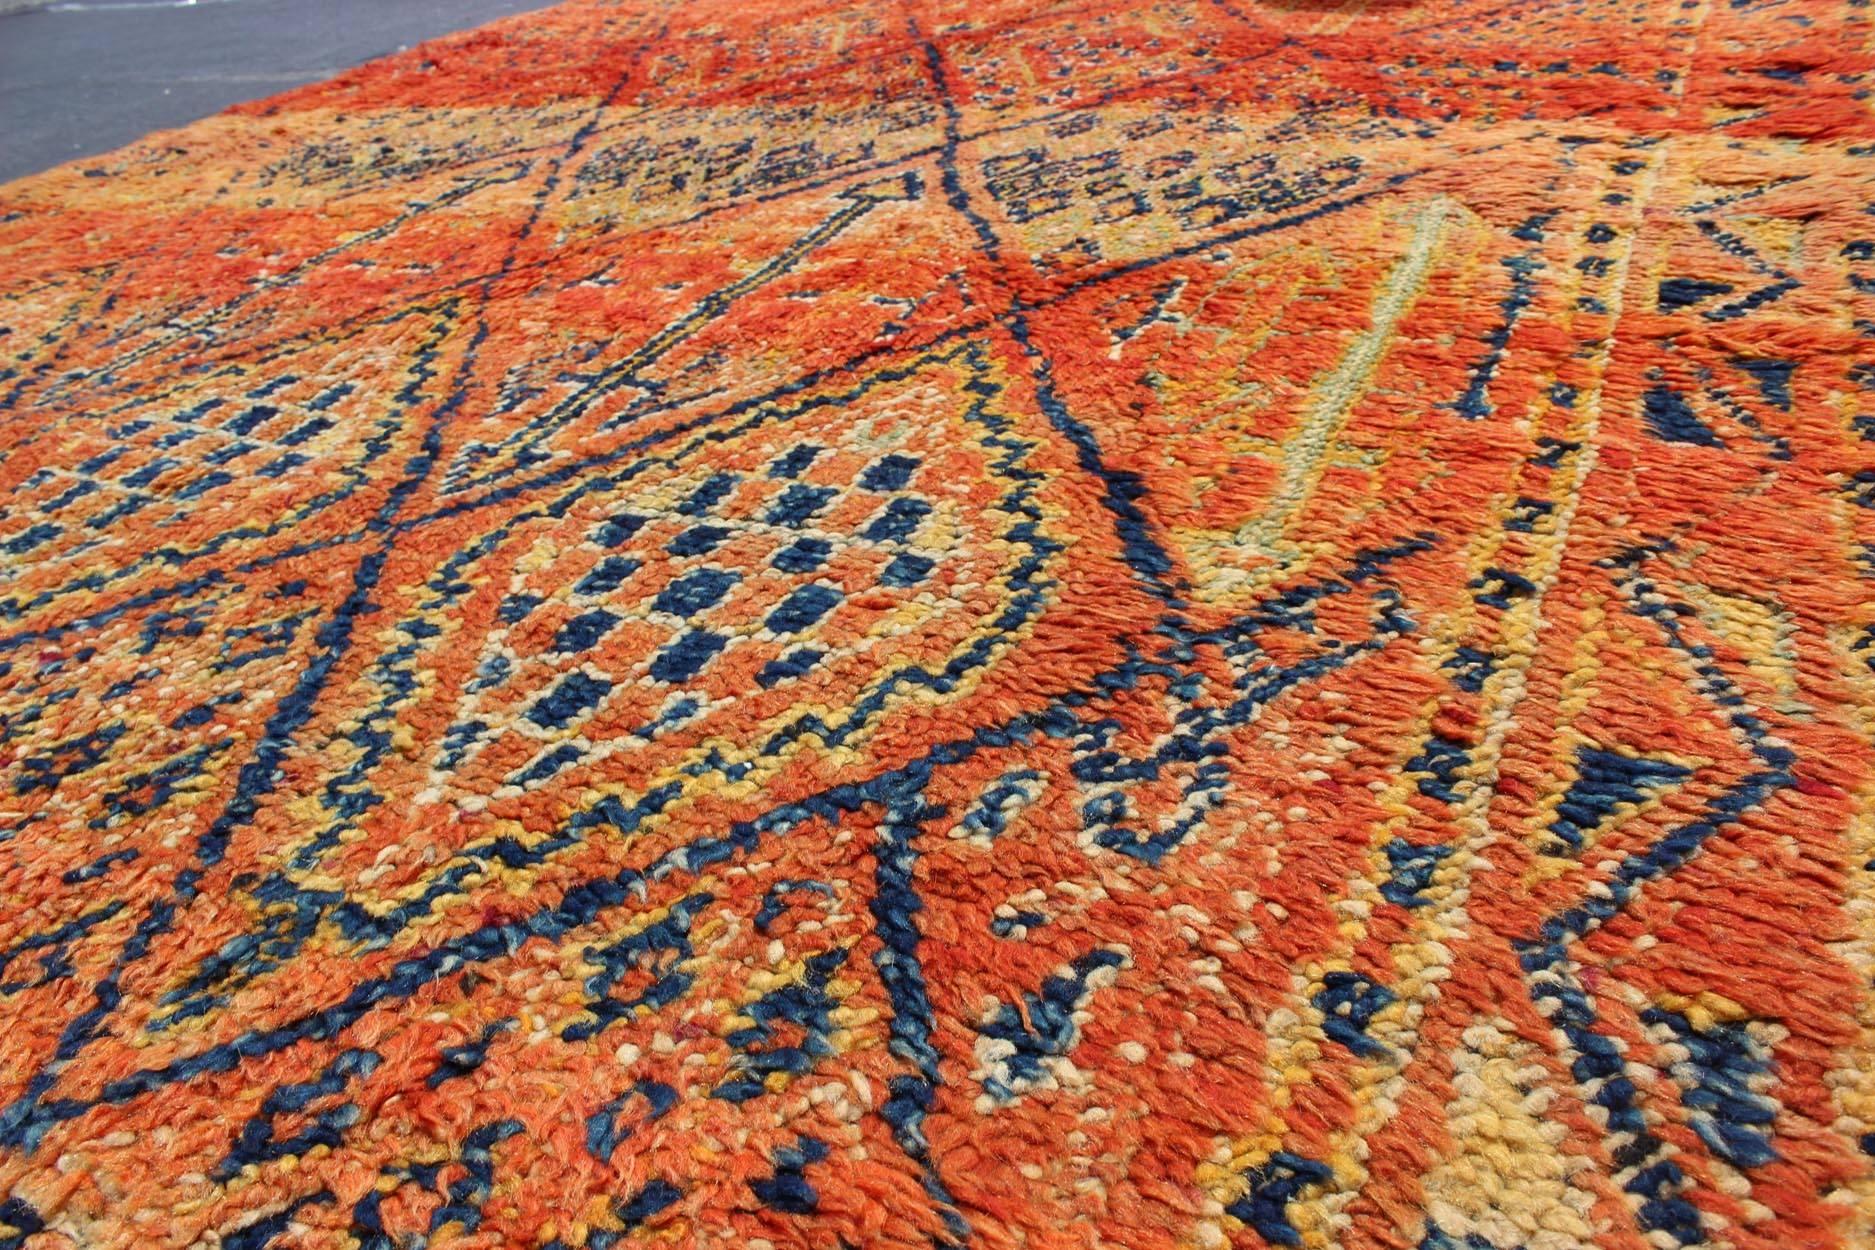 Hand-Knotted Vintage Moroccan Beni Mklid Rug in Oranges and Creams with Deep Navy Blue For Sale